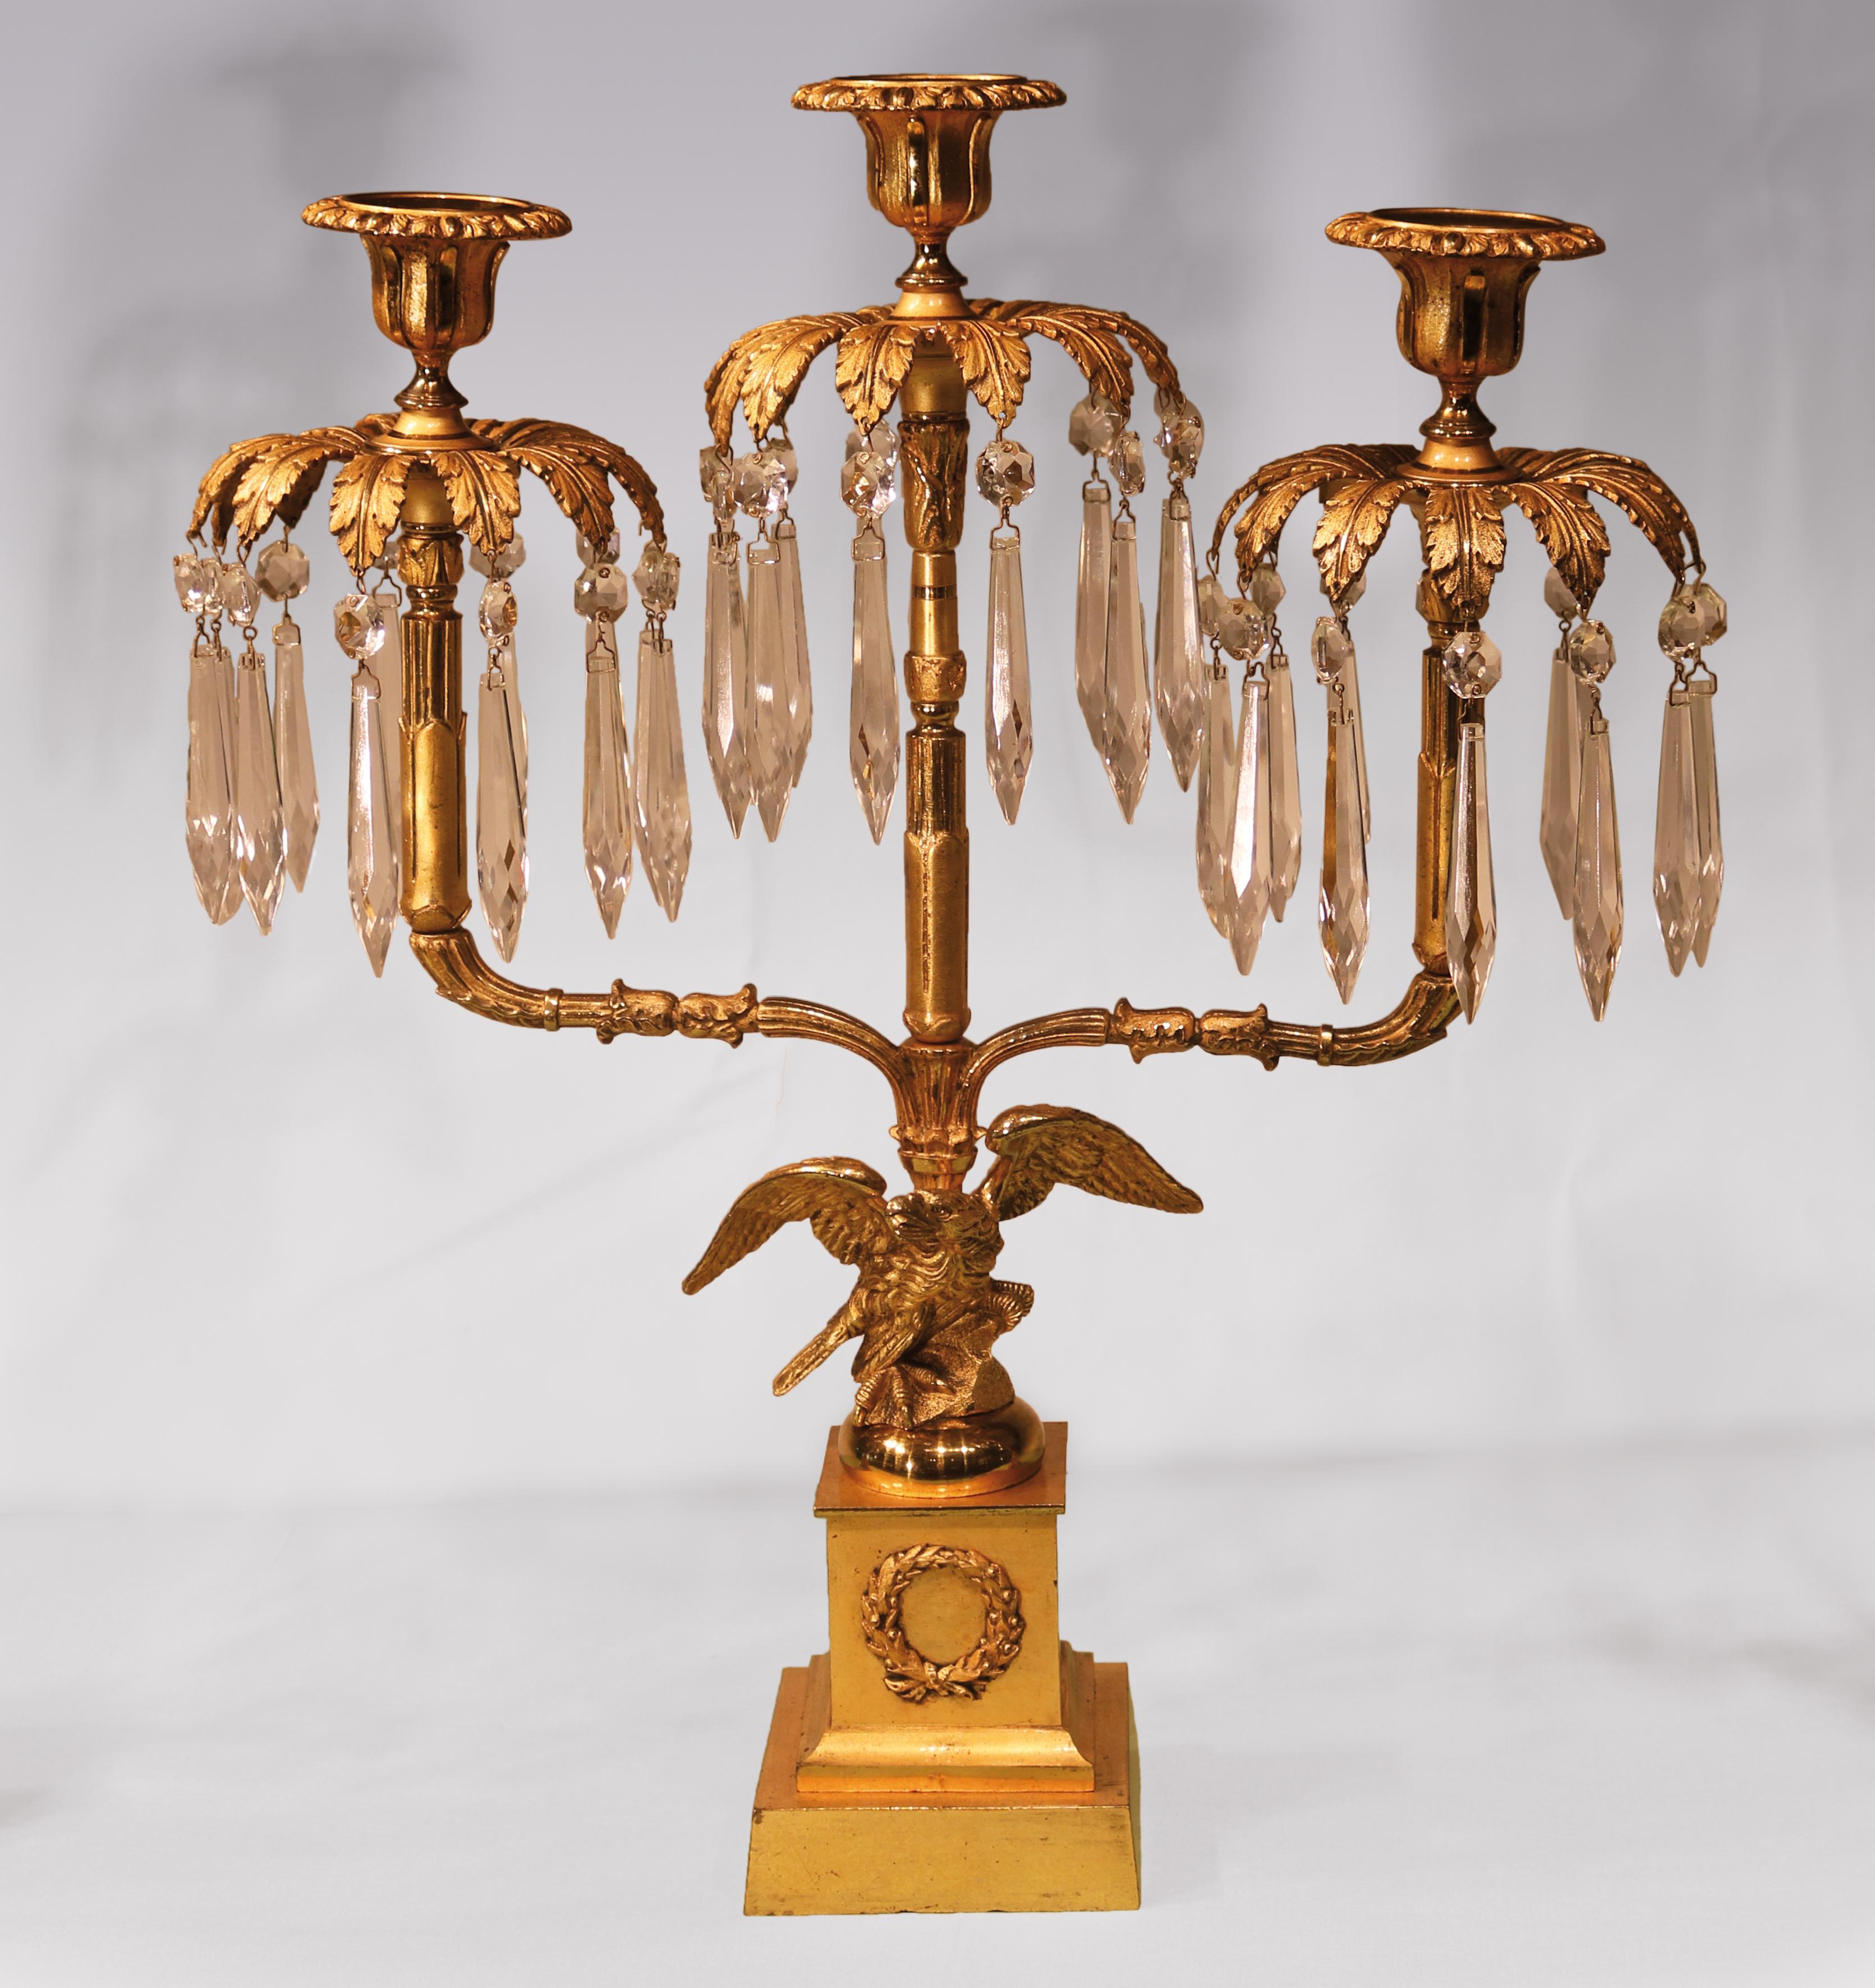 An unuusual set of large early 19th century Regency period bronze and ormolu lustre candlesticks, consisting of two singles and one triple, having lotus leaf sconces above acanthus canopies with tall stems held by well-caste eagles, raised on square